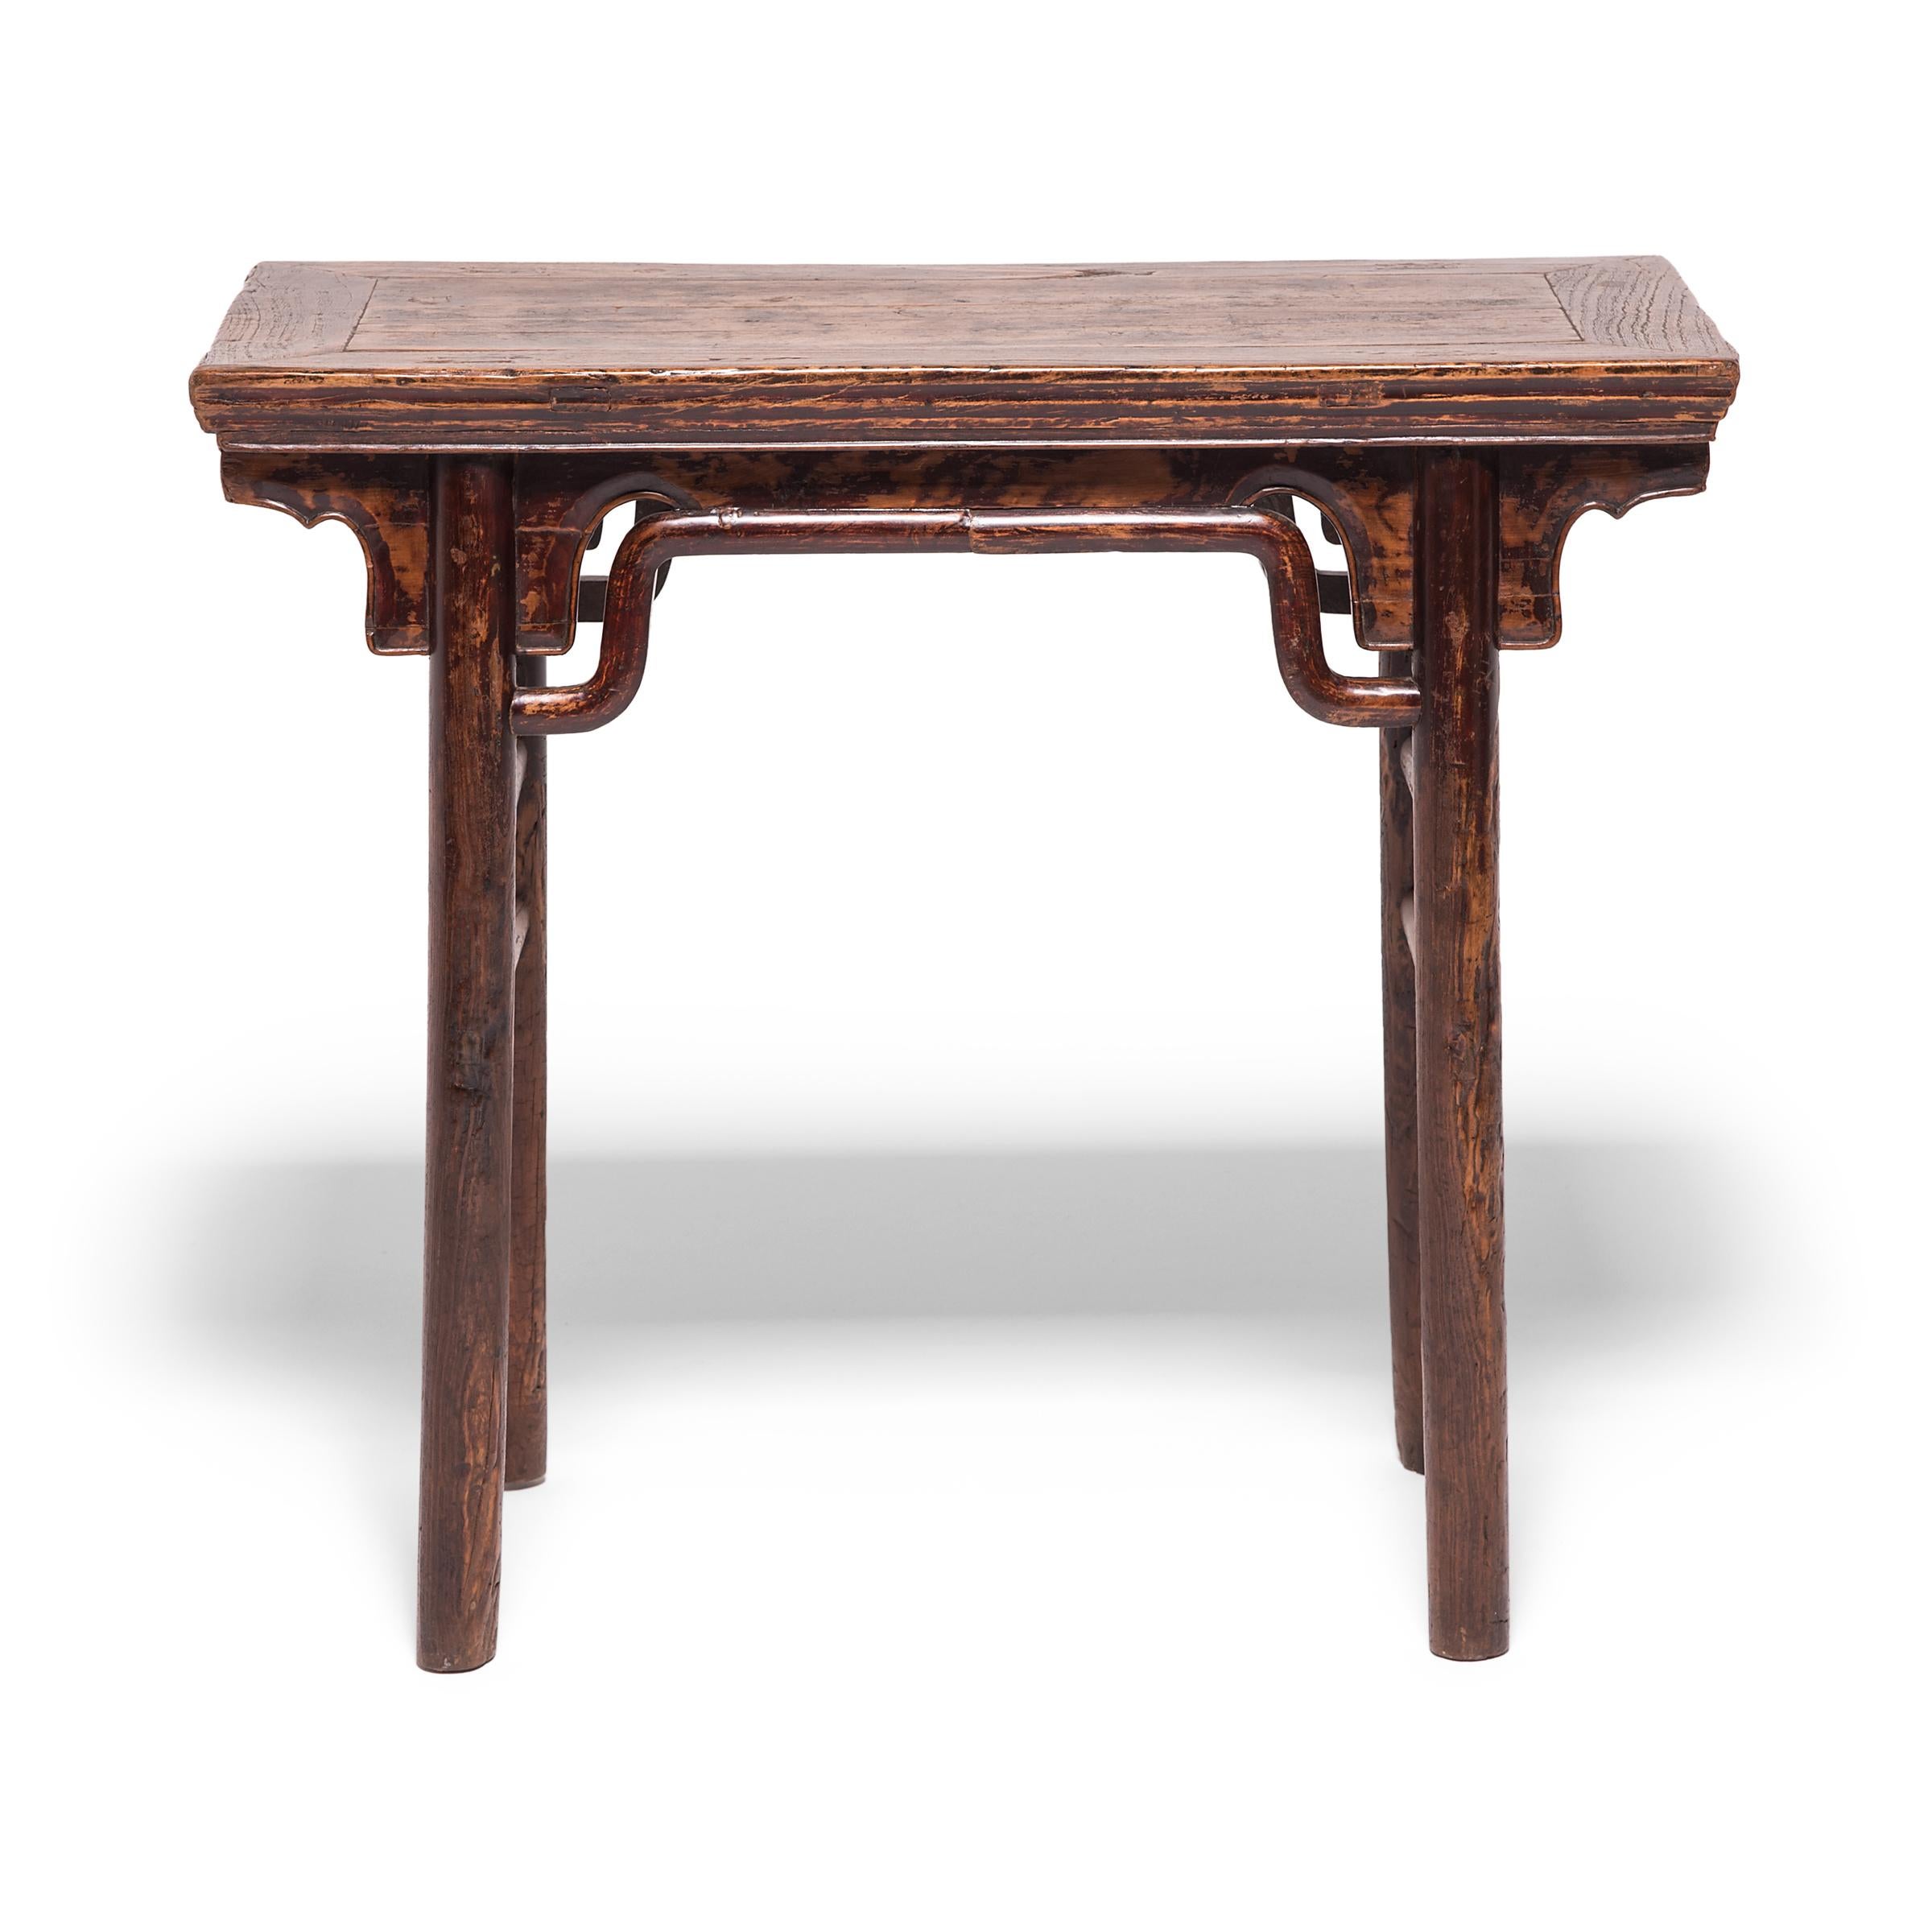 The elegant design of this 19th century table is inspired by earlier Ming dynasty furniture designs highly prized by collectors. Clean lines, simple humpback stretchers, and a beautifully worn patina only add to the console table's value. The